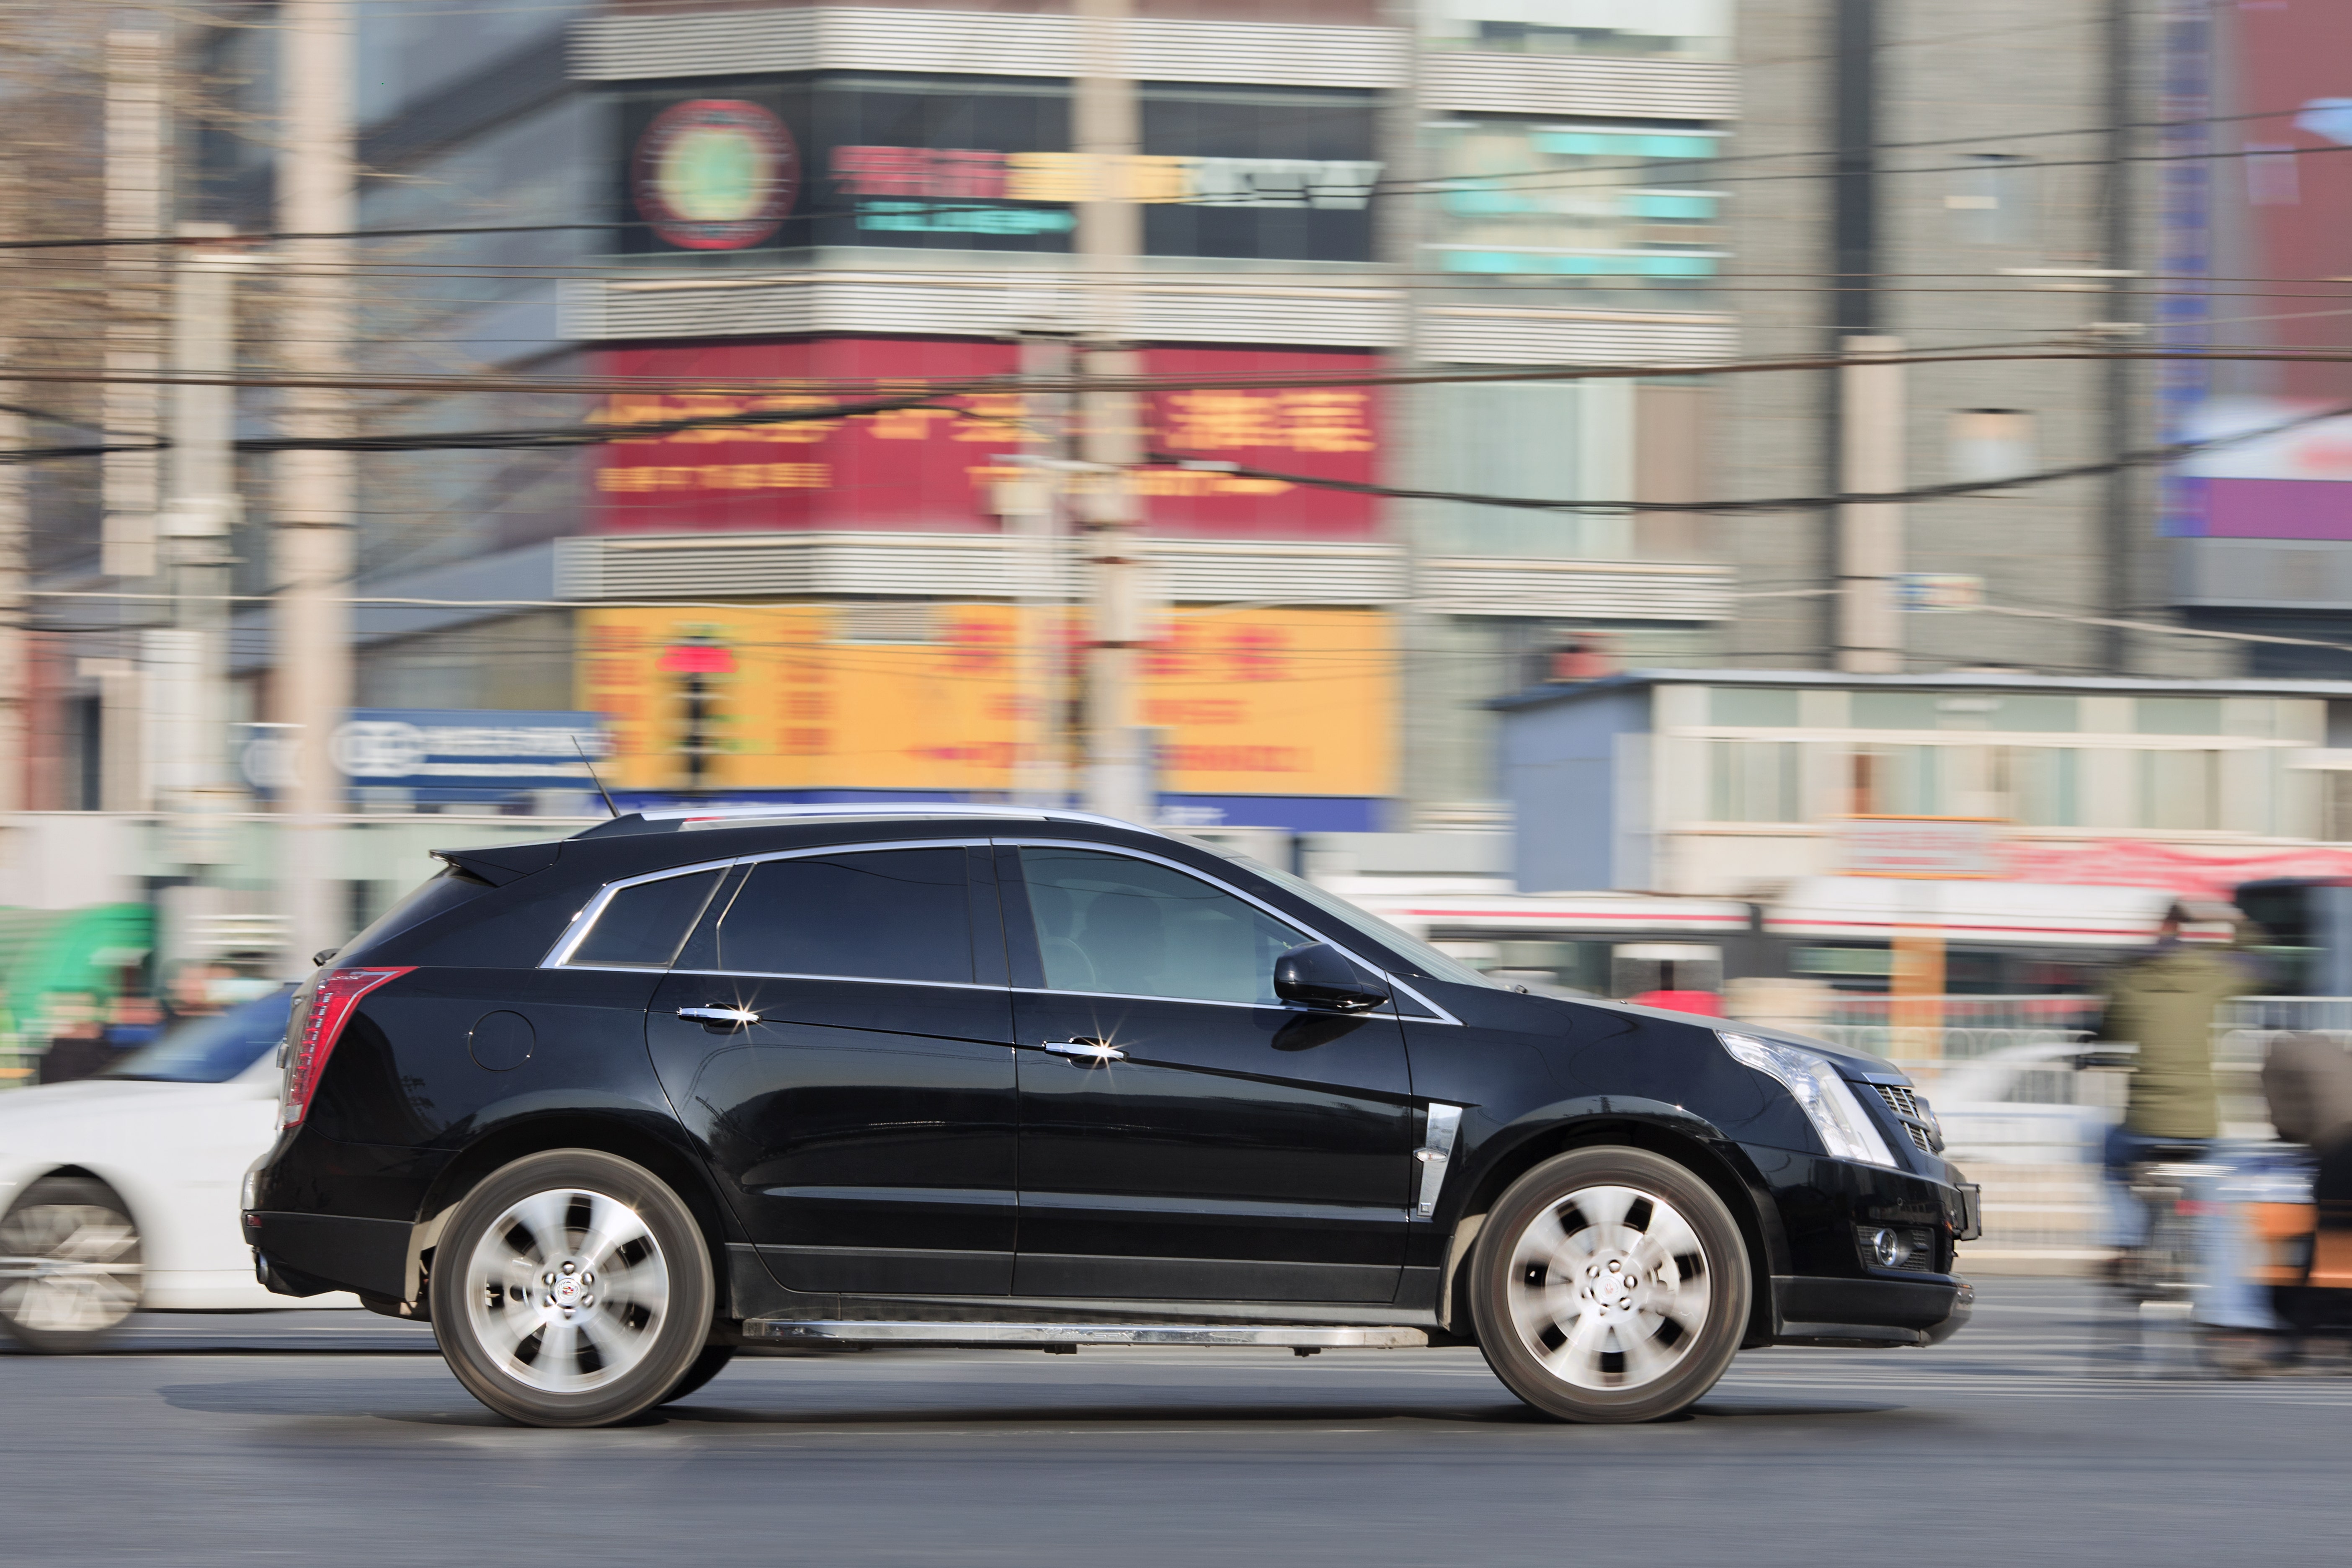 GM Tries To Regain China Drive By Aiming At Super-Rich: Here's What It's All About